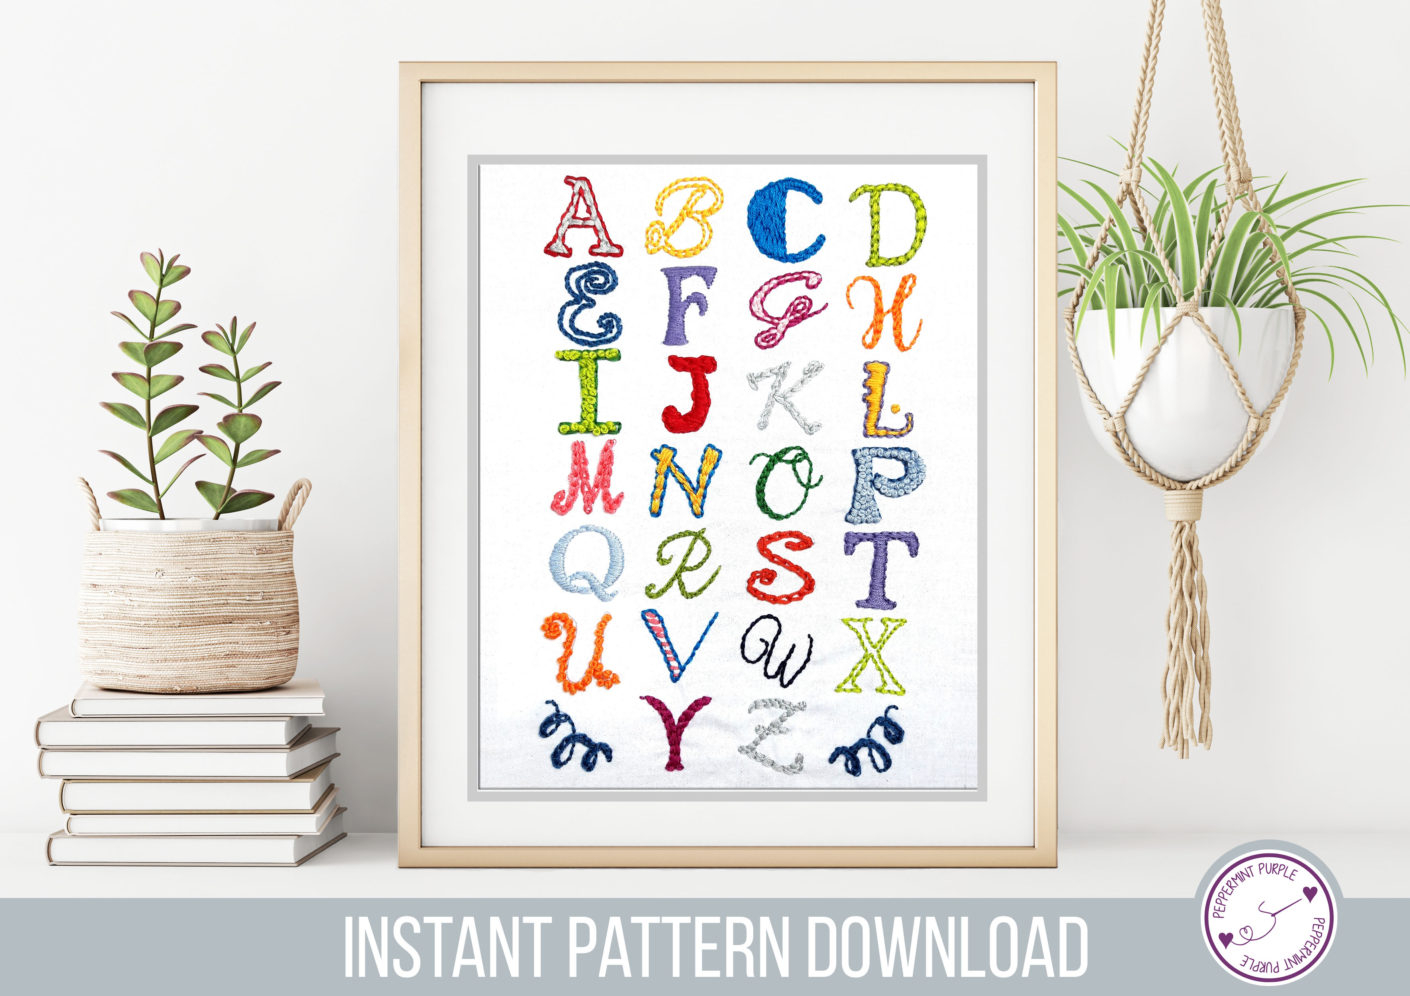 Herb Embroidery Patterns Hand Embroidery Alphabet Sampler Pattern Peppermint Purple